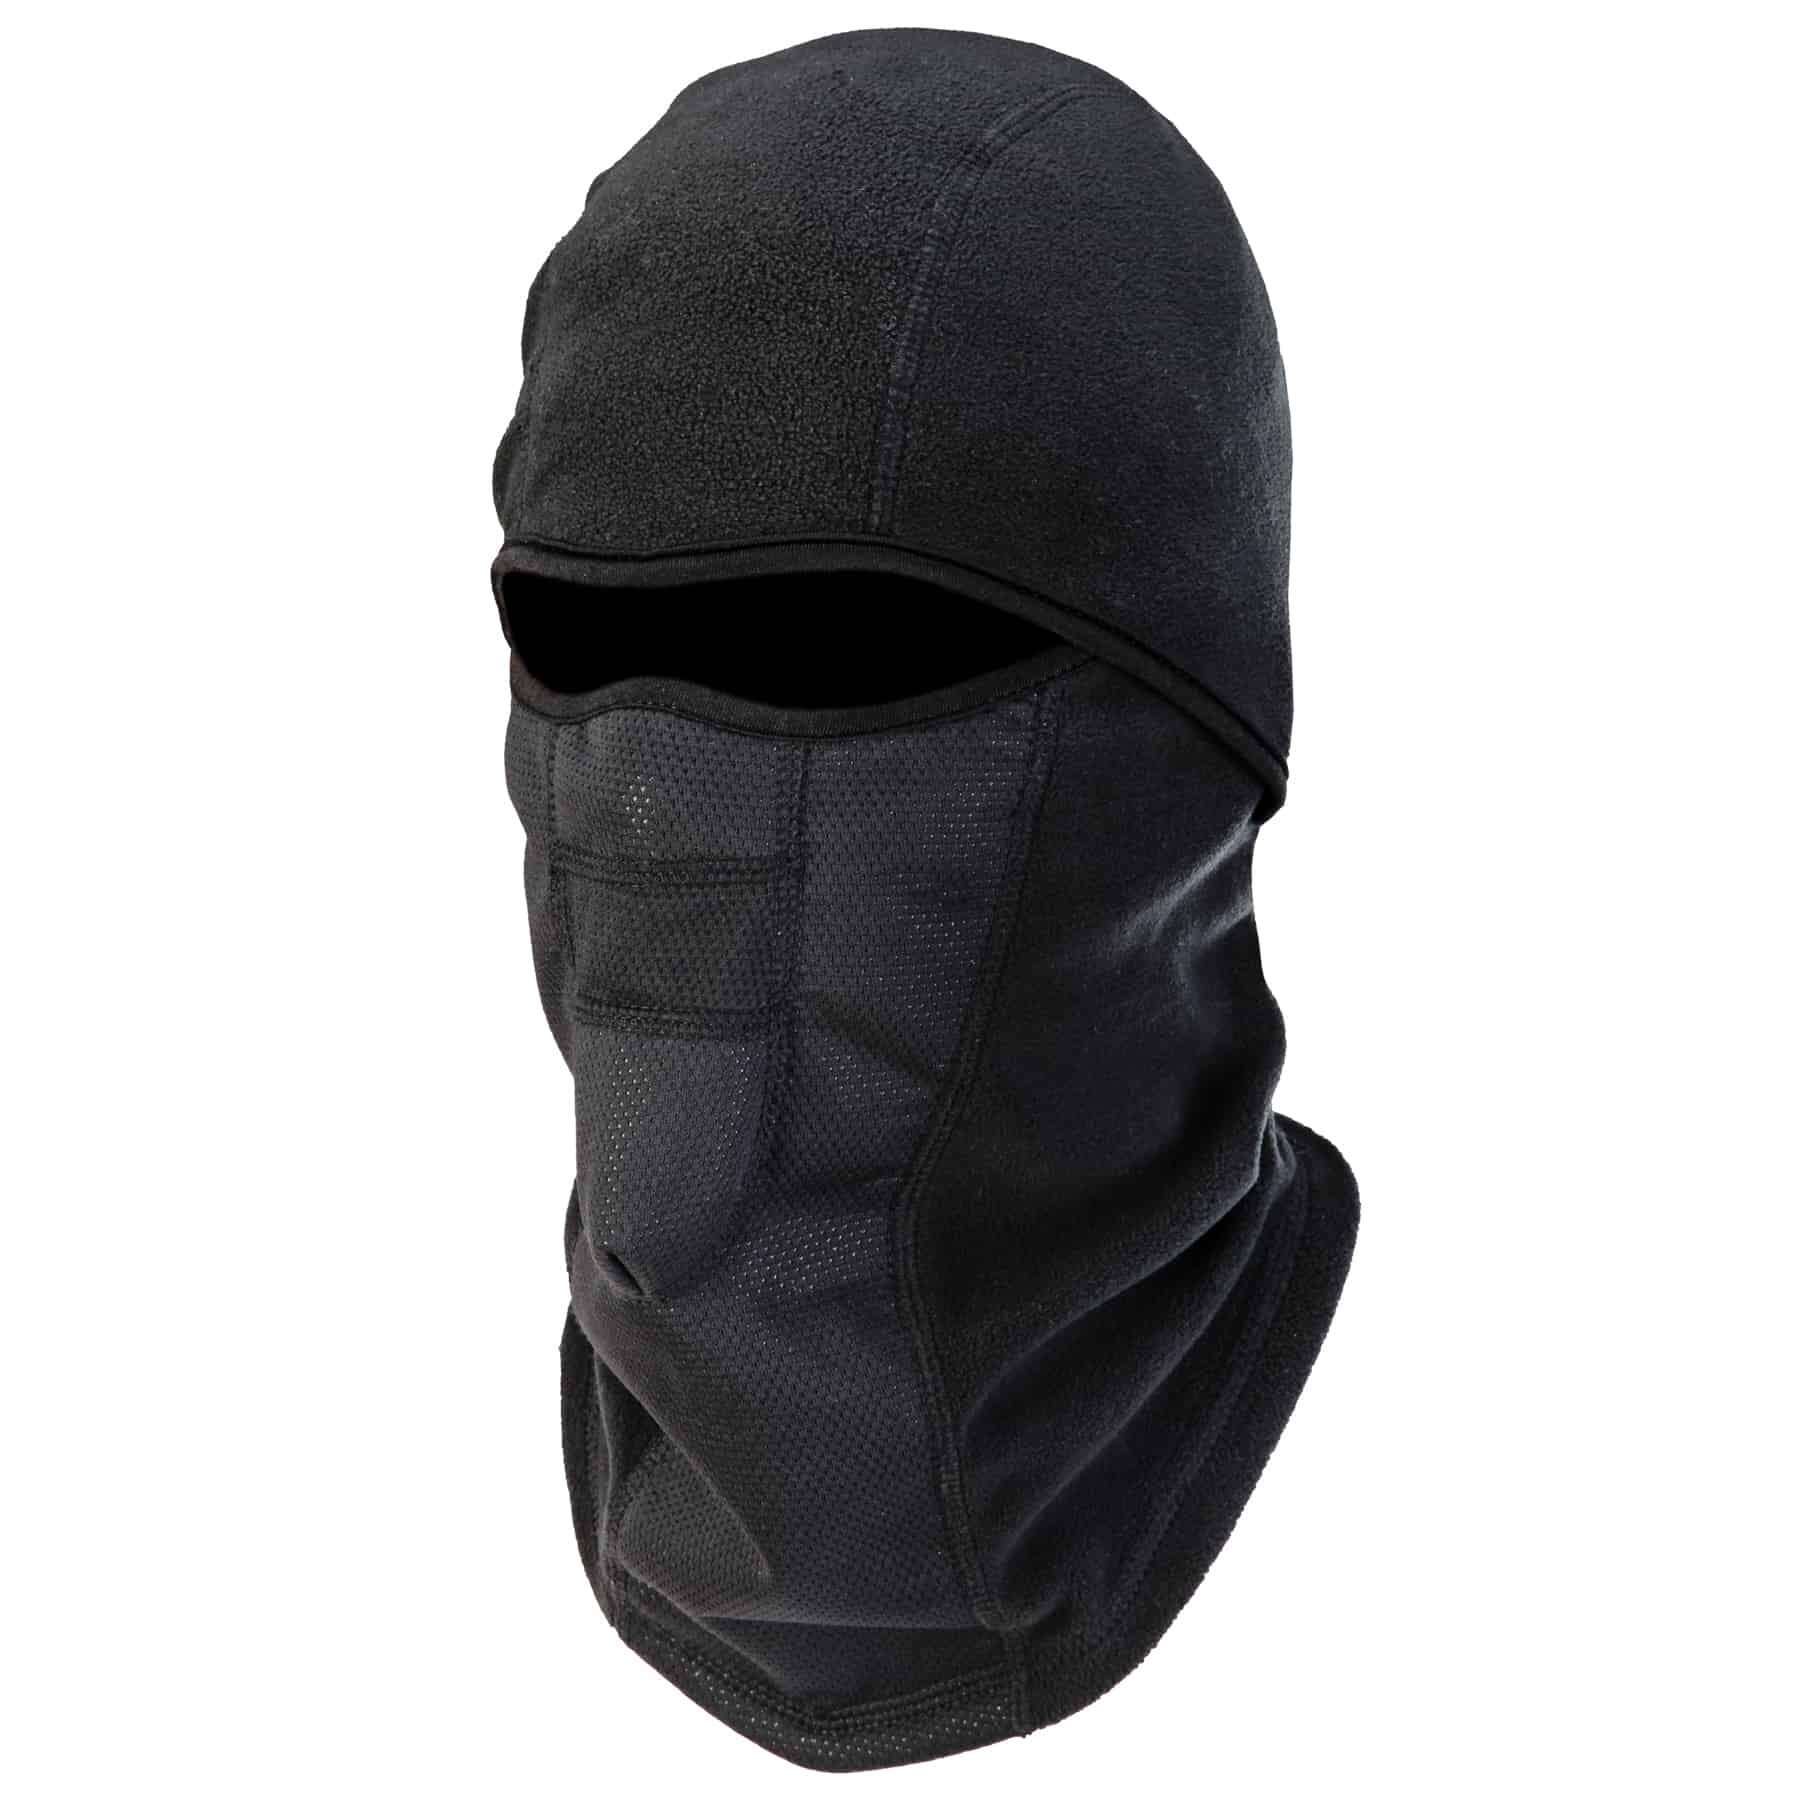 Details about   X 3 black Balaclava Breathable Windproof washable FaceMask outdoor headgear 